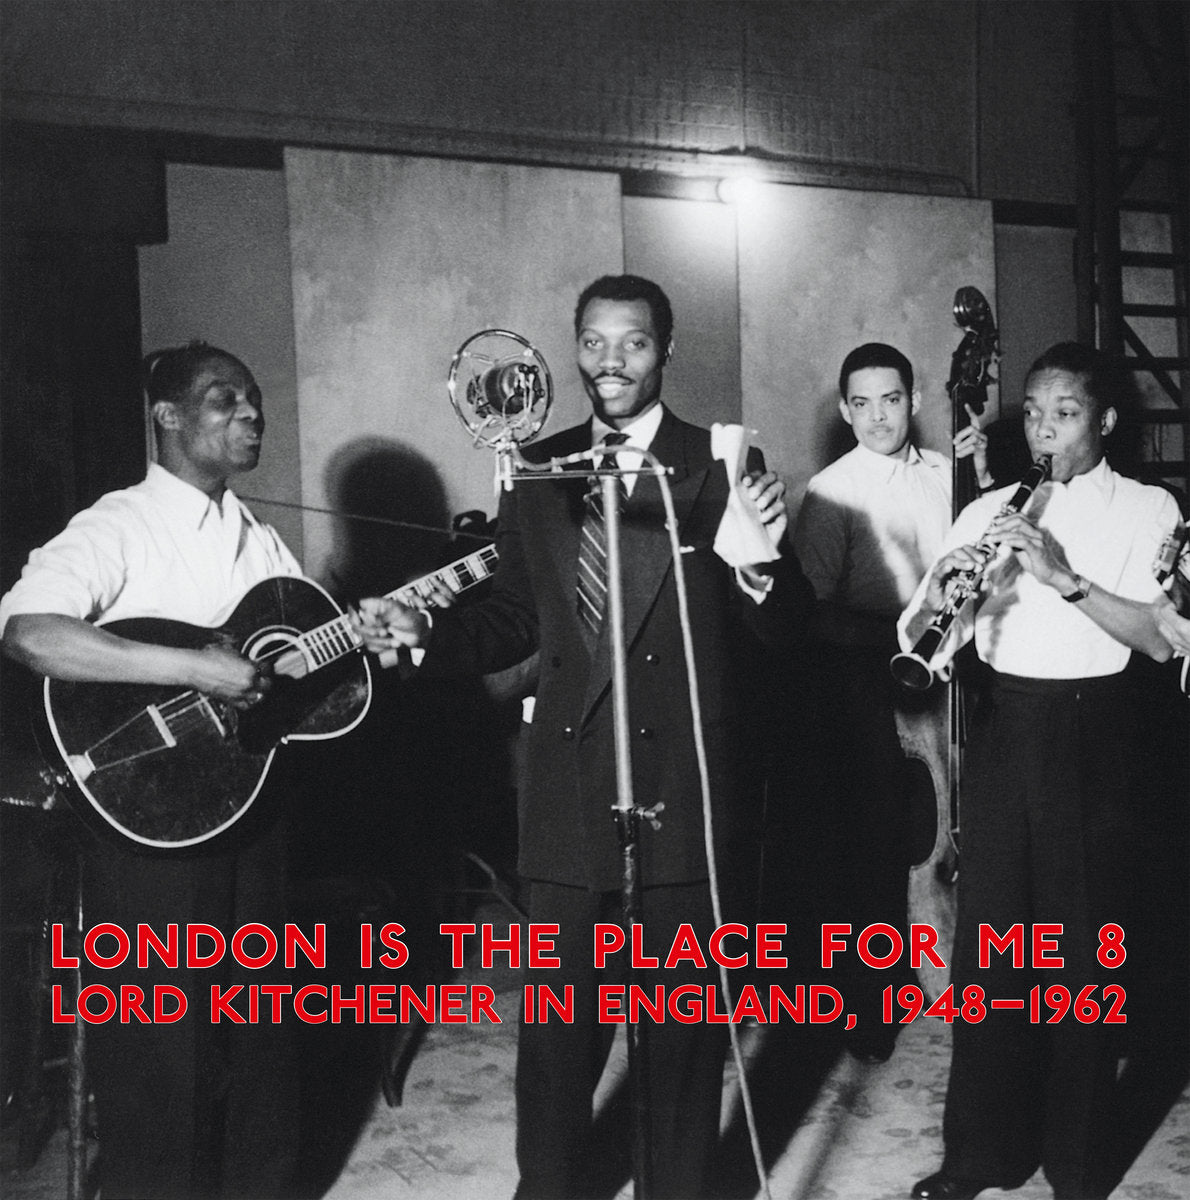 Lord Kitchener - London Is The Place For Me 8 Lord Kitchener In England, 1948-1962